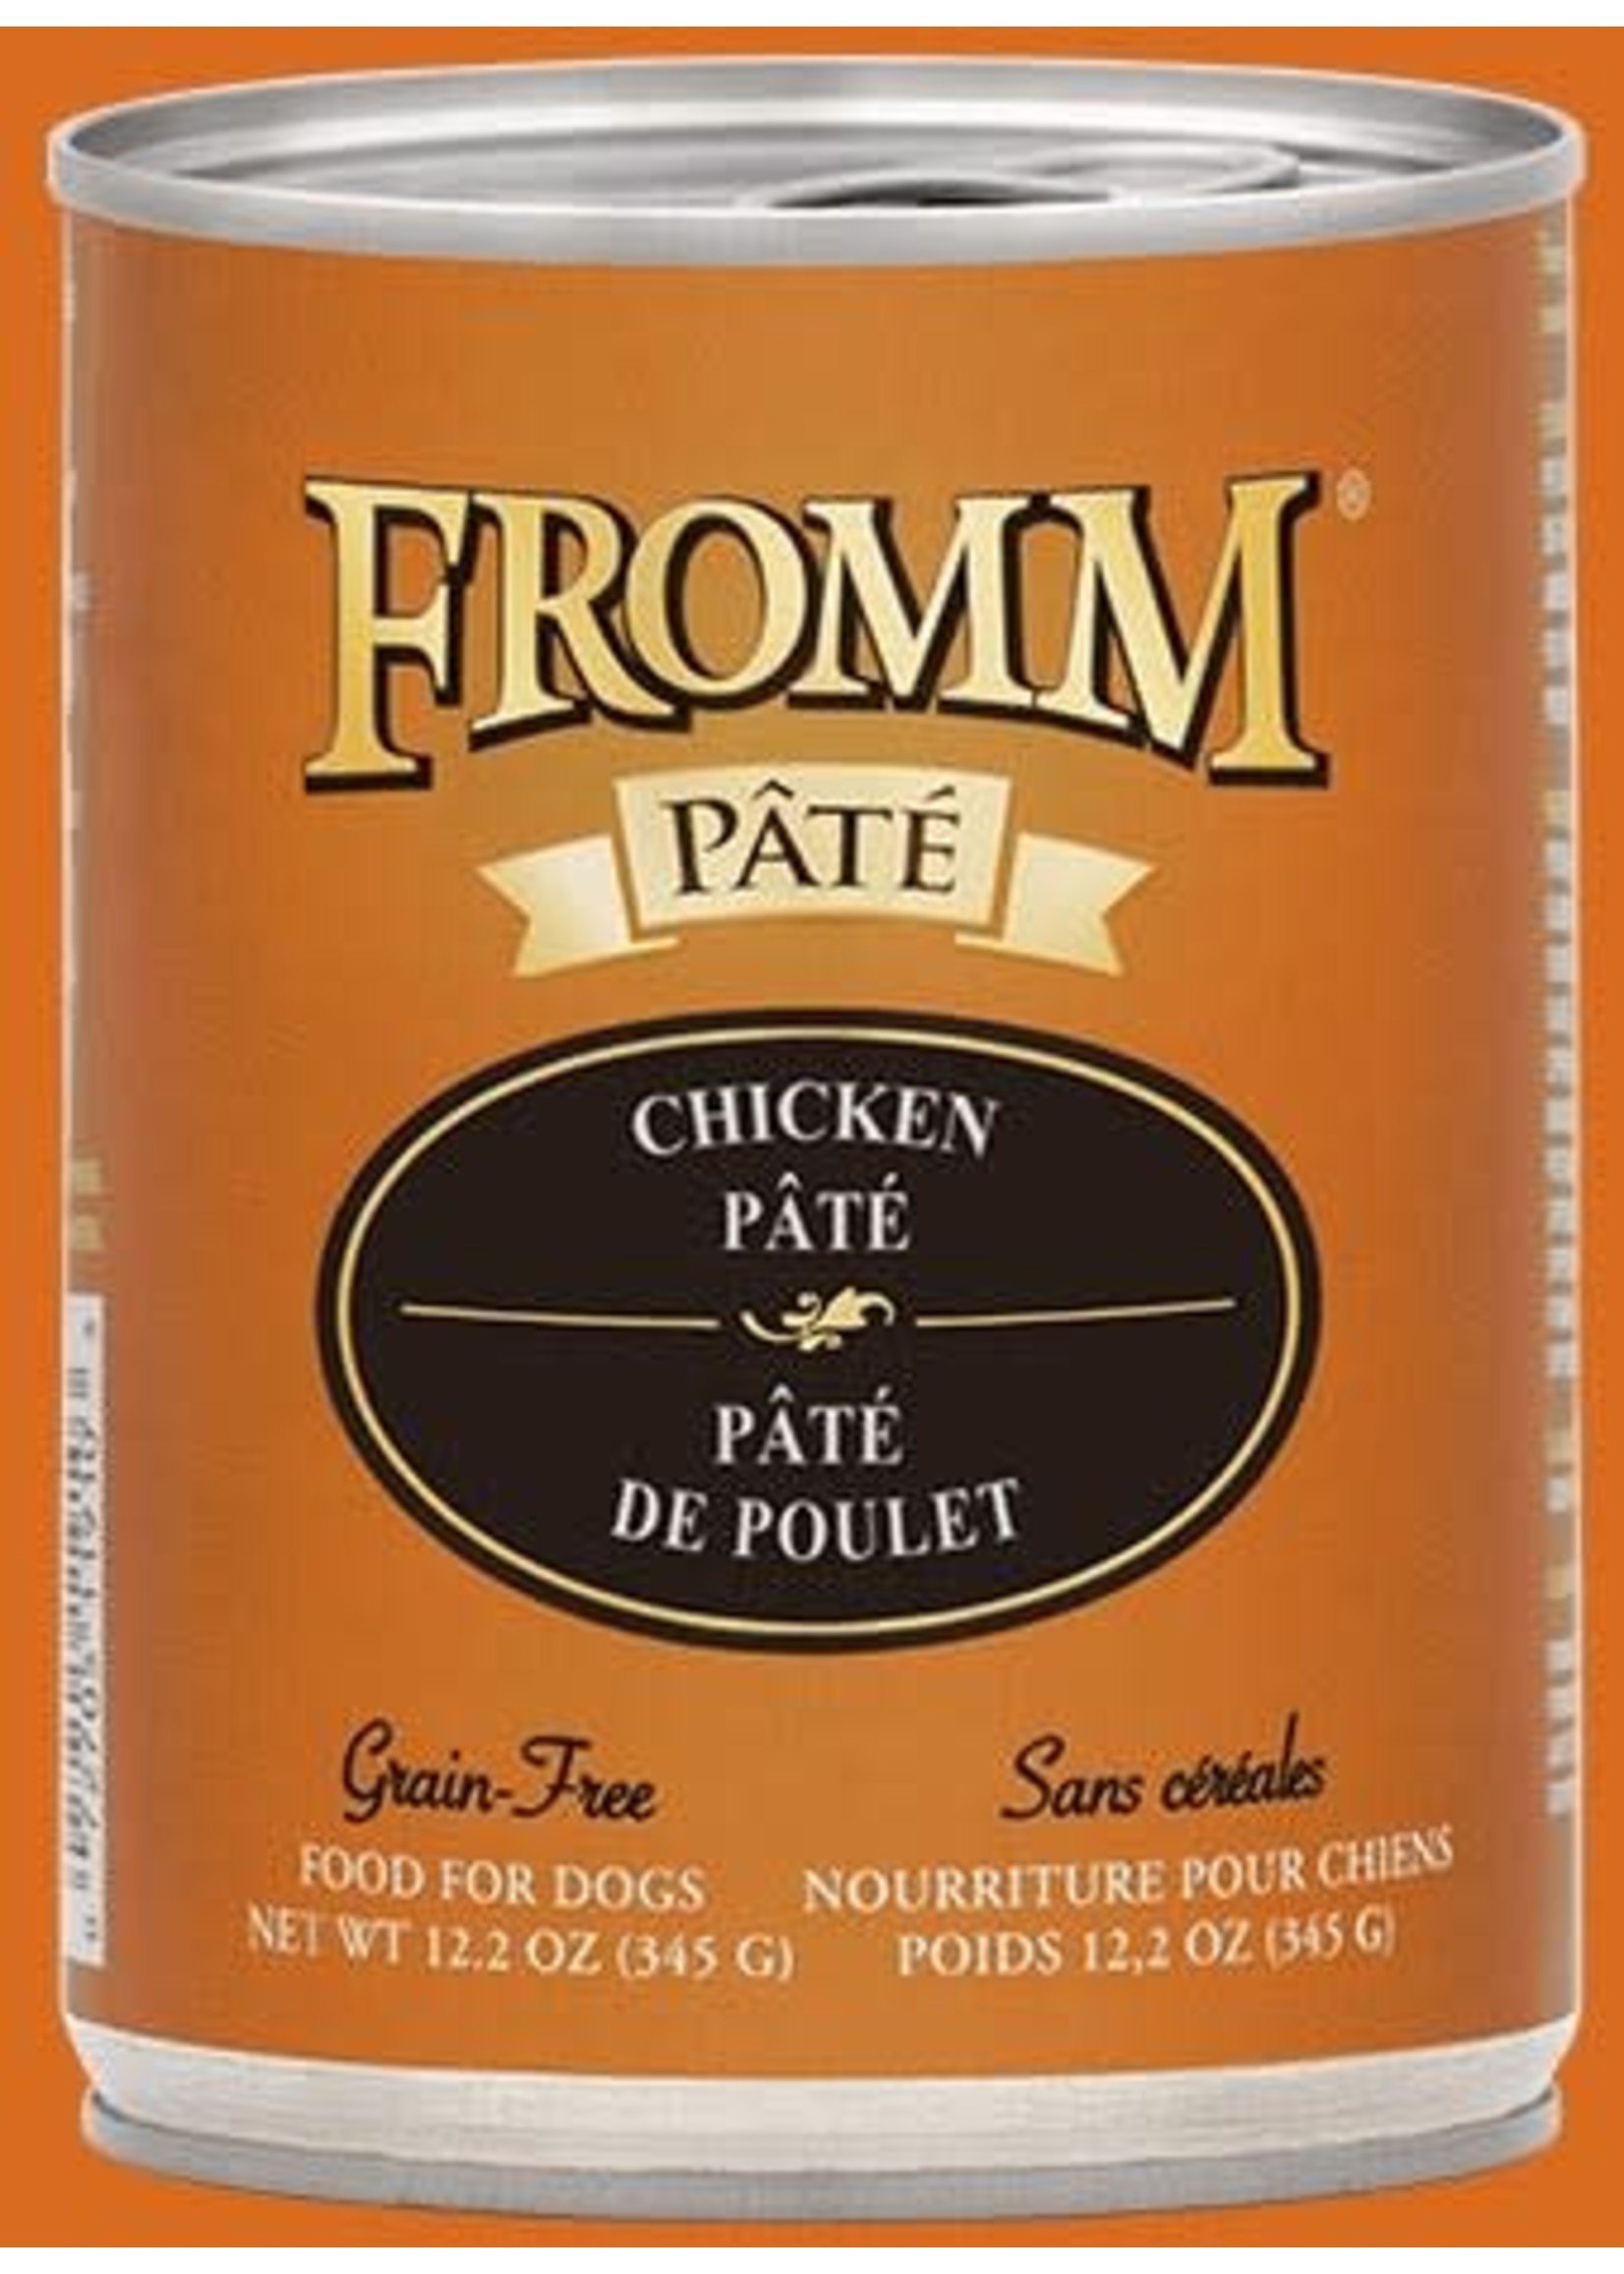 Fromm Family Grain Free Chicken Pate' 12.2 oz